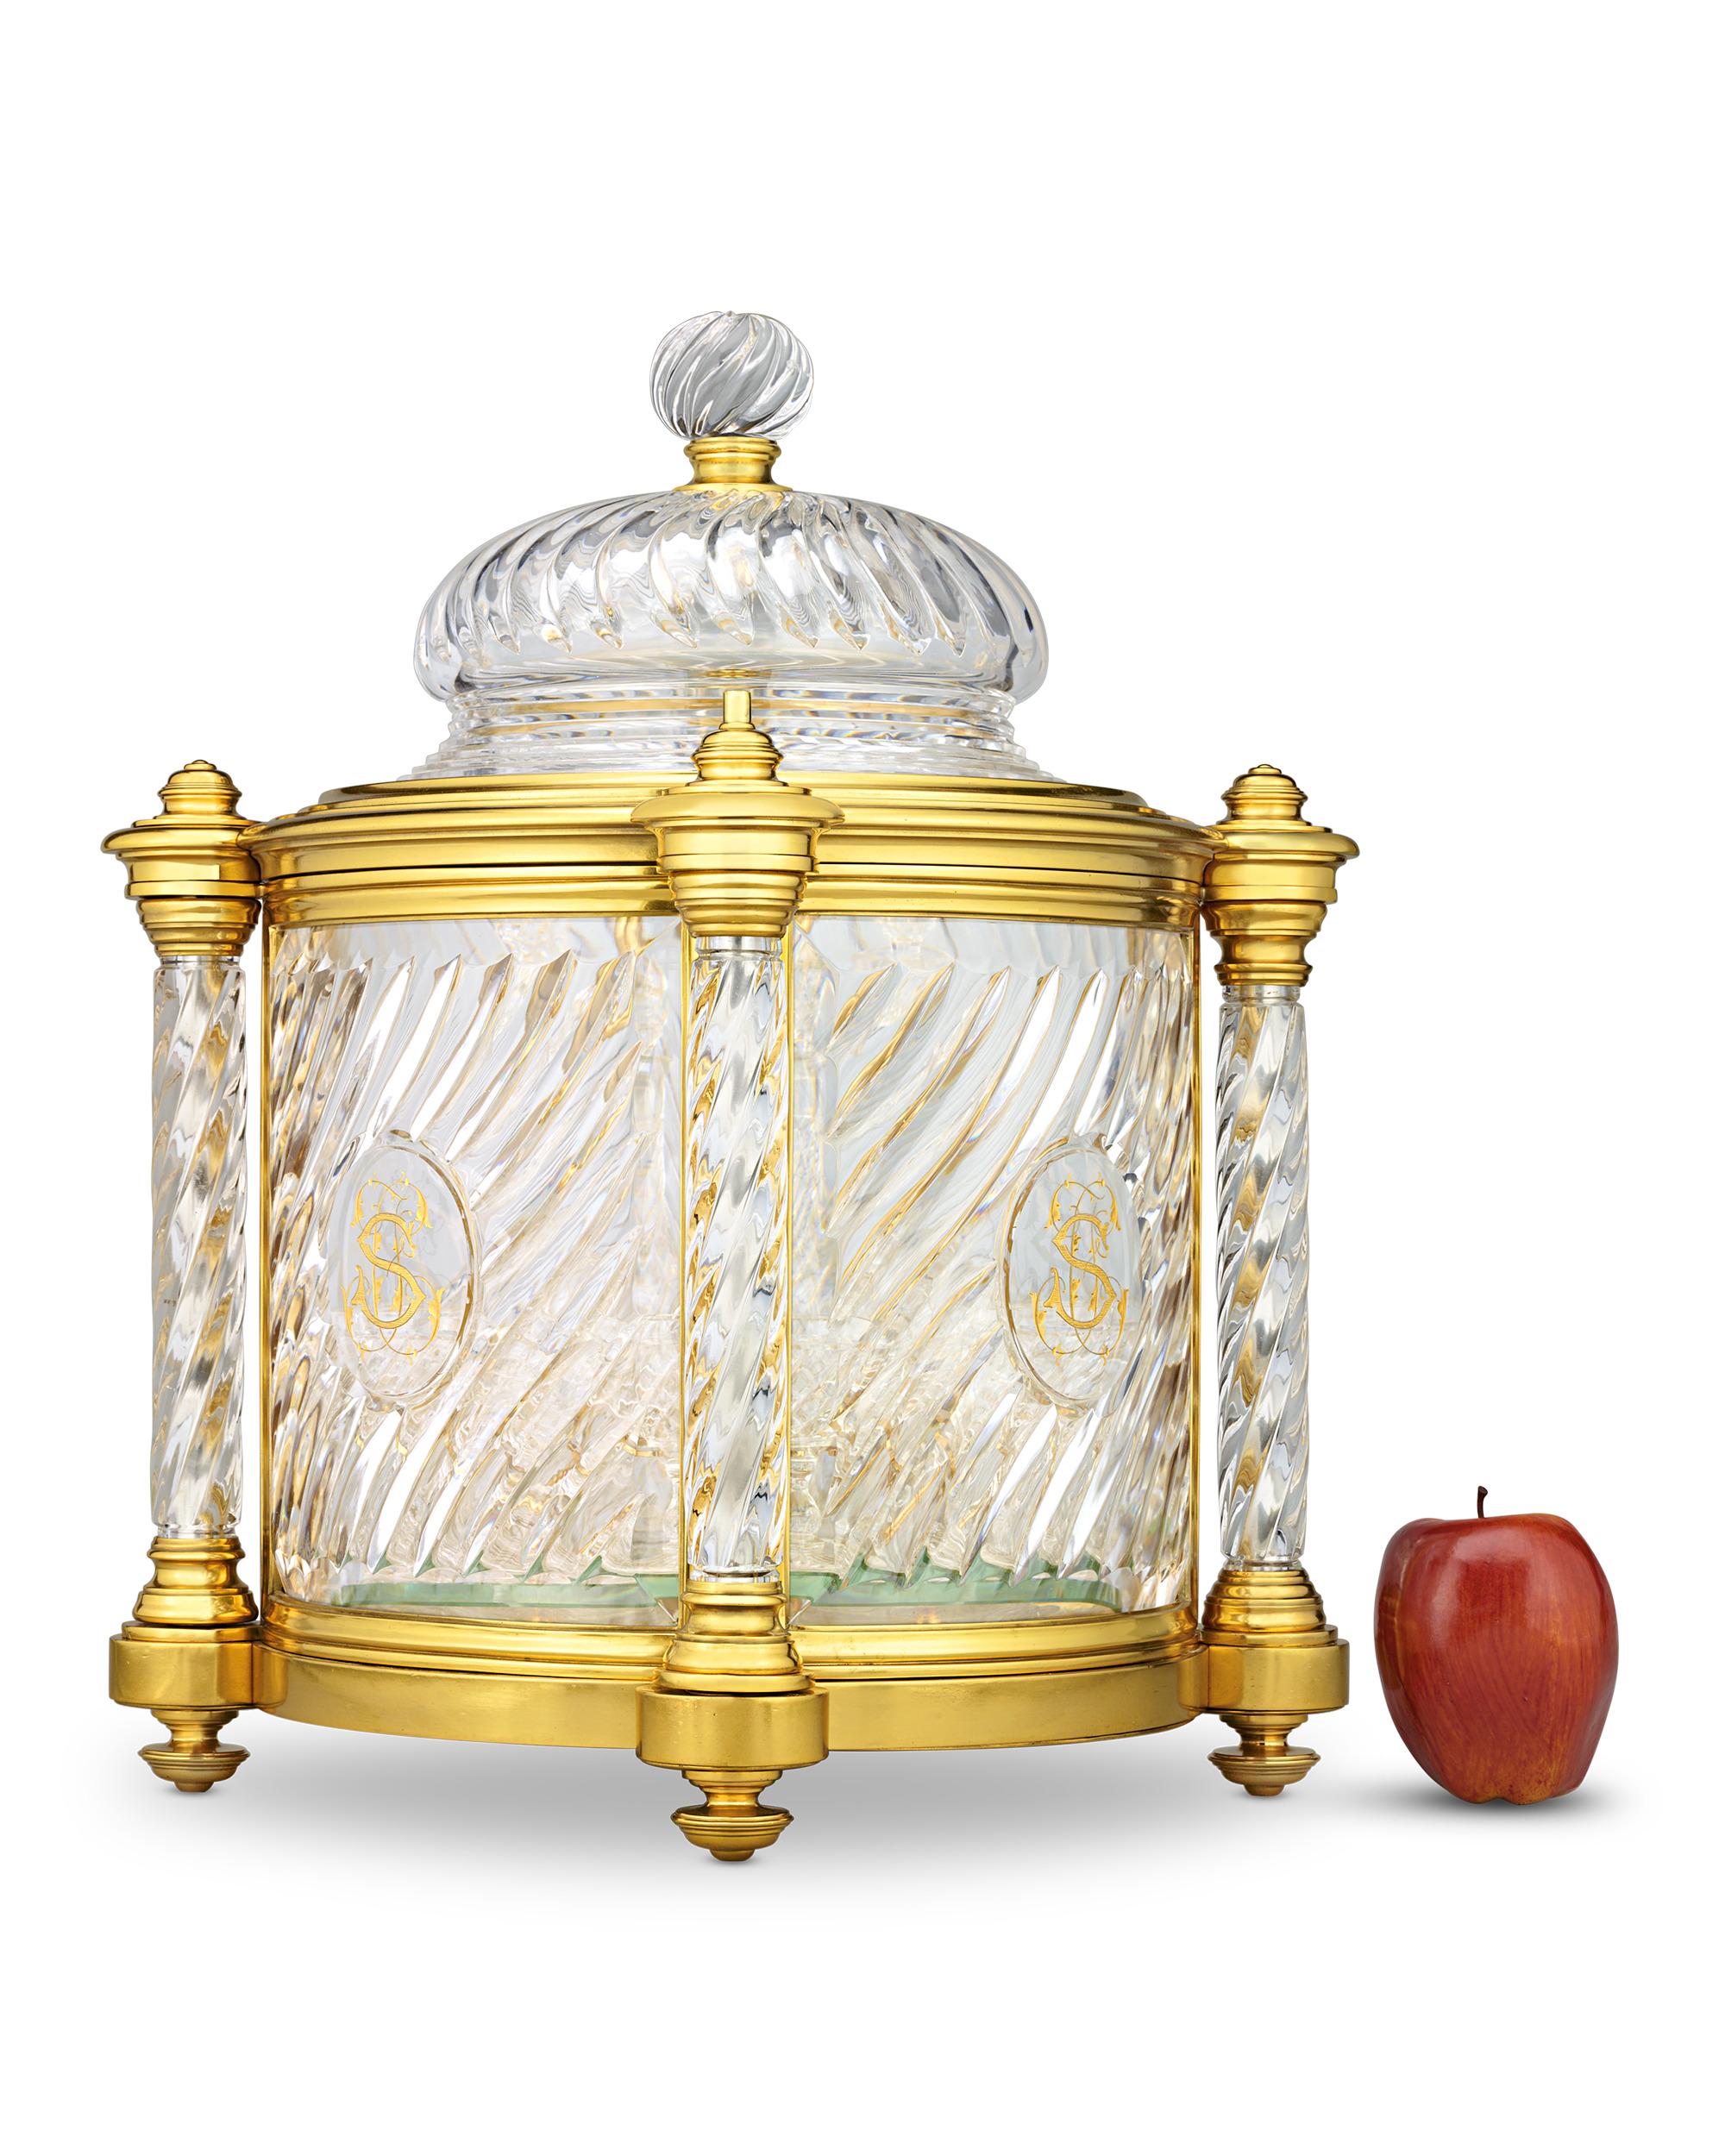 Baccarat Ormolu And Cut Glass Liqueur Casket In Excellent Condition For Sale In New Orleans, LA